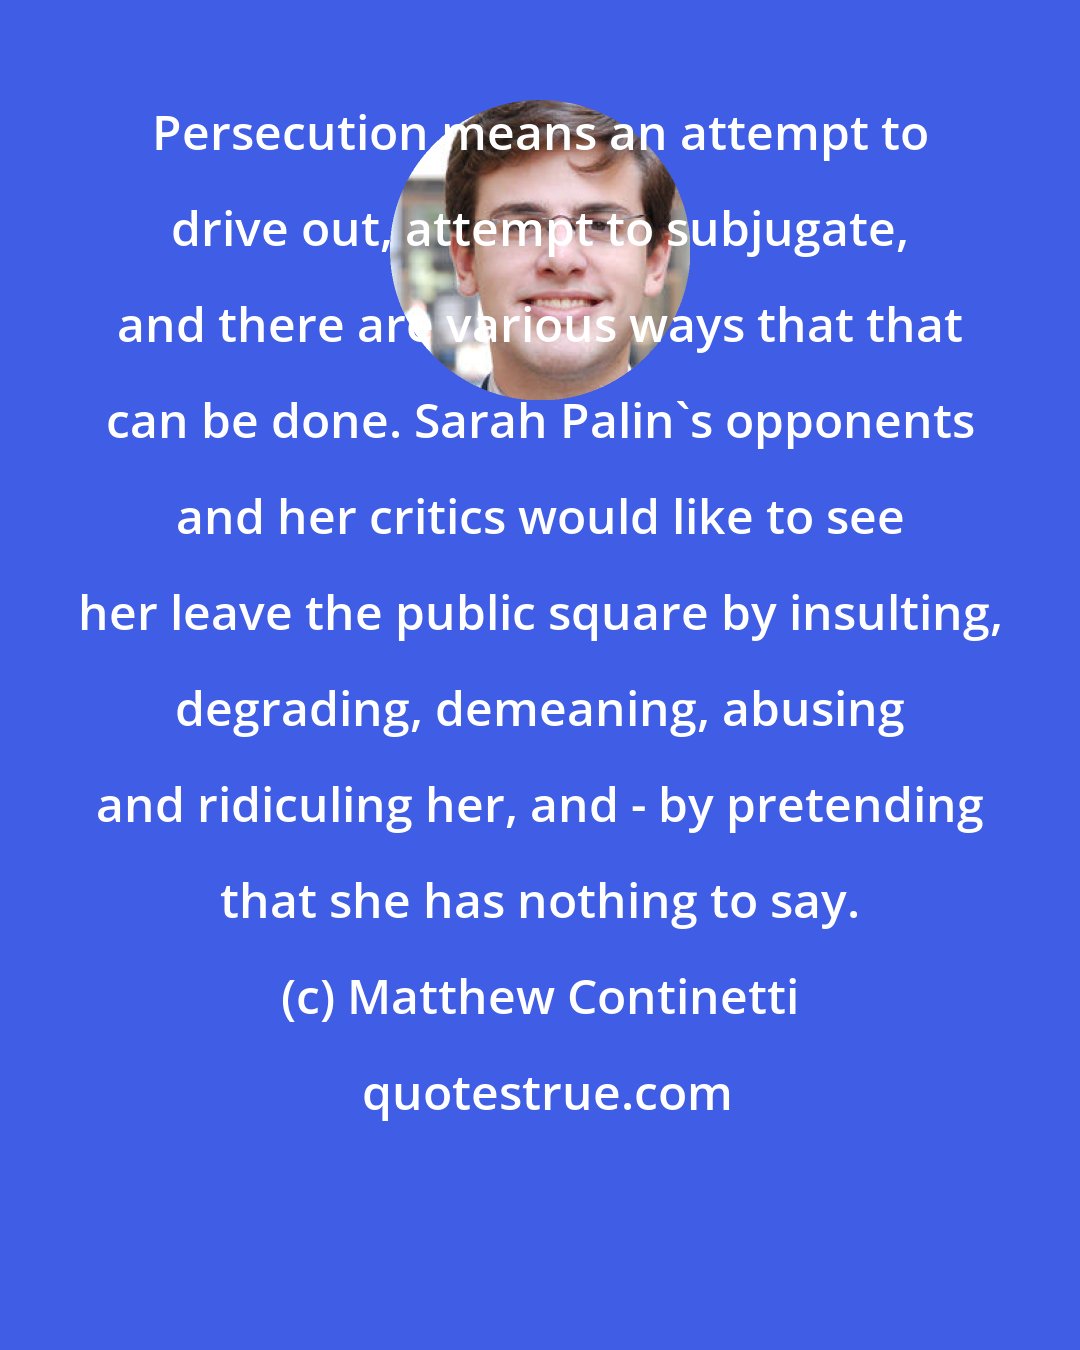 Matthew Continetti: Persecution means an attempt to drive out, attempt to subjugate, and there are various ways that that can be done. Sarah Palin's opponents and her critics would like to see her leave the public square by insulting, degrading, demeaning, abusing and ridiculing her, and - by pretending that she has nothing to say.